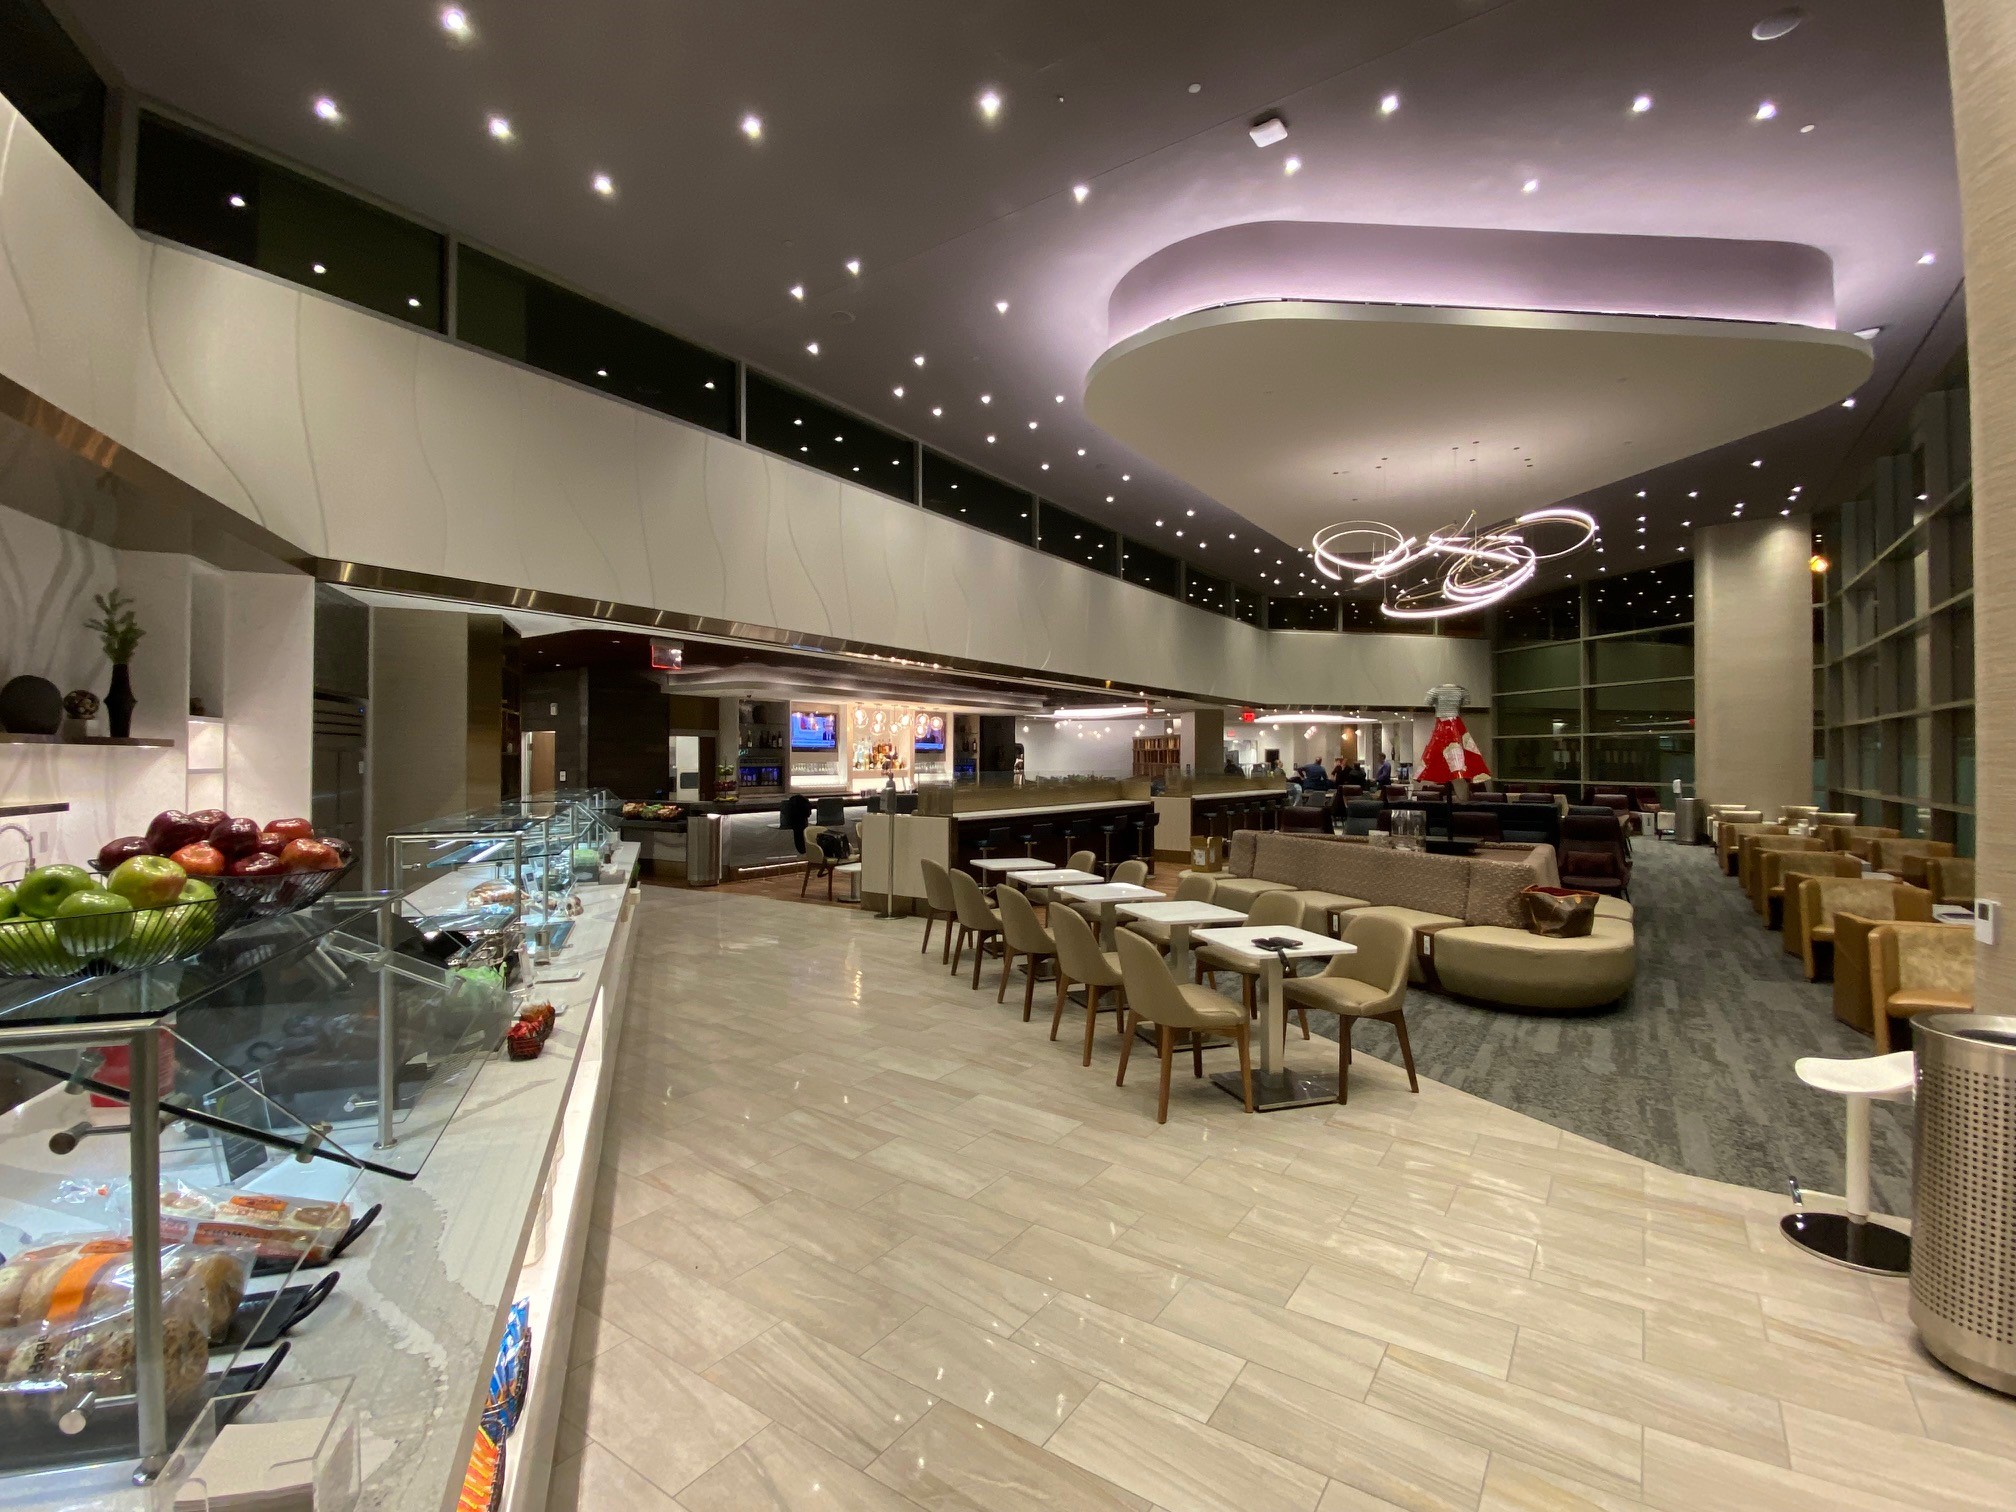 An expansive new kitchen will allow lounge teams to enhance the Club’s food and beverage service, serving seasonal, chef-inspired food options made from scratch. 